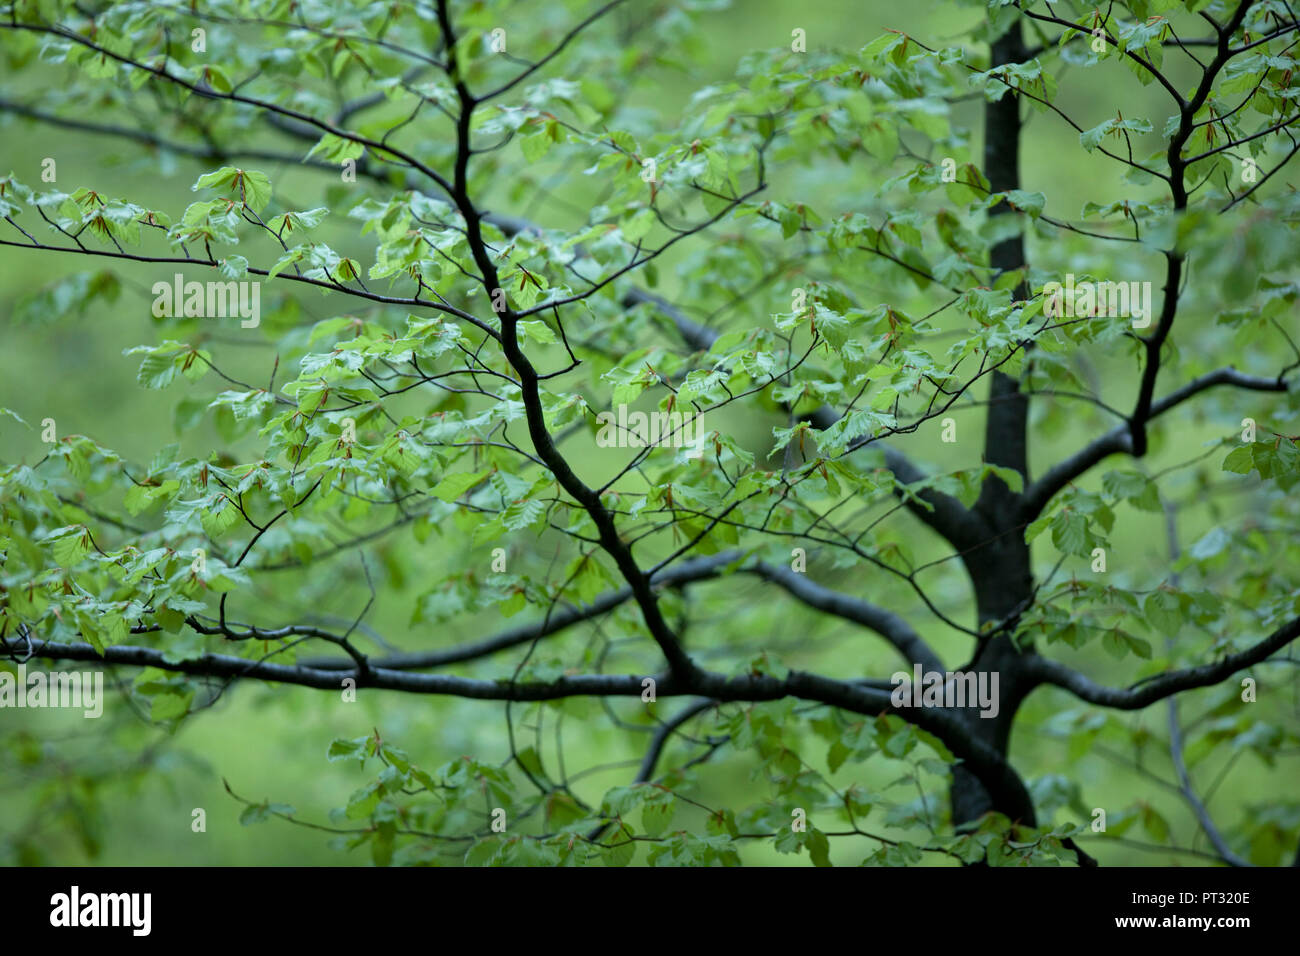 Beech tree with new leaves, close-up Stock Photo